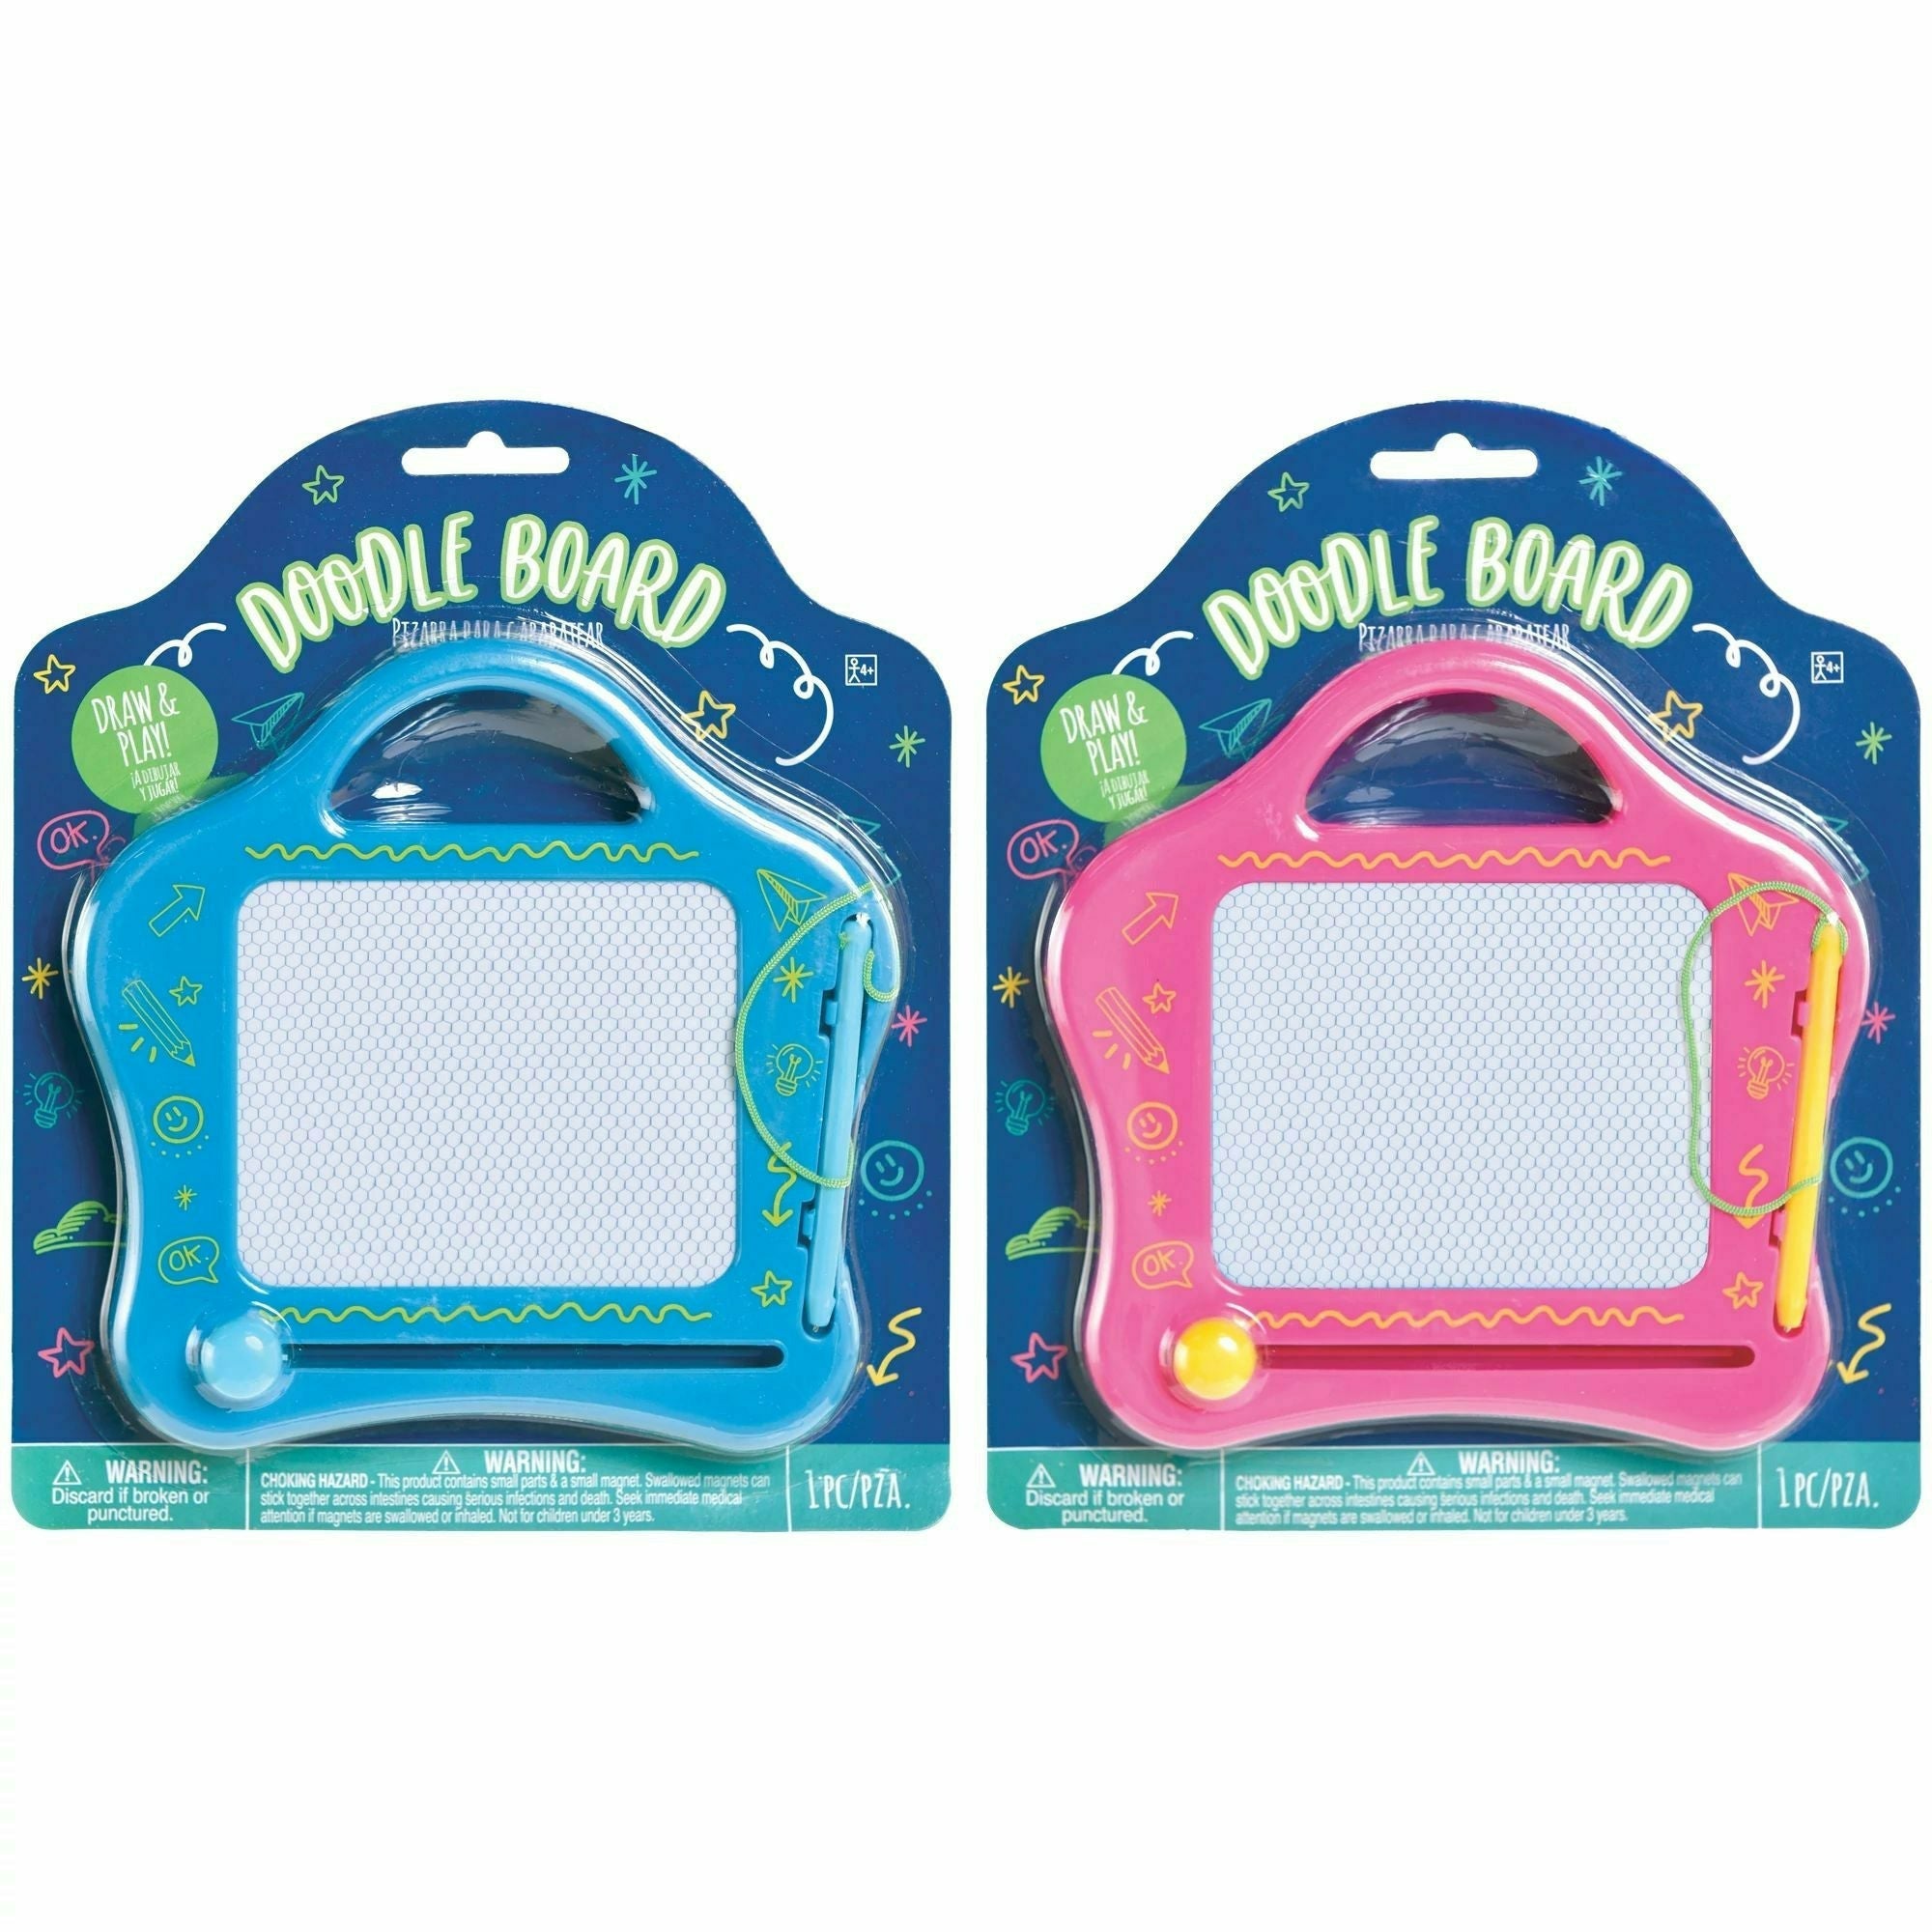 Amscan TOYS Doodle Board